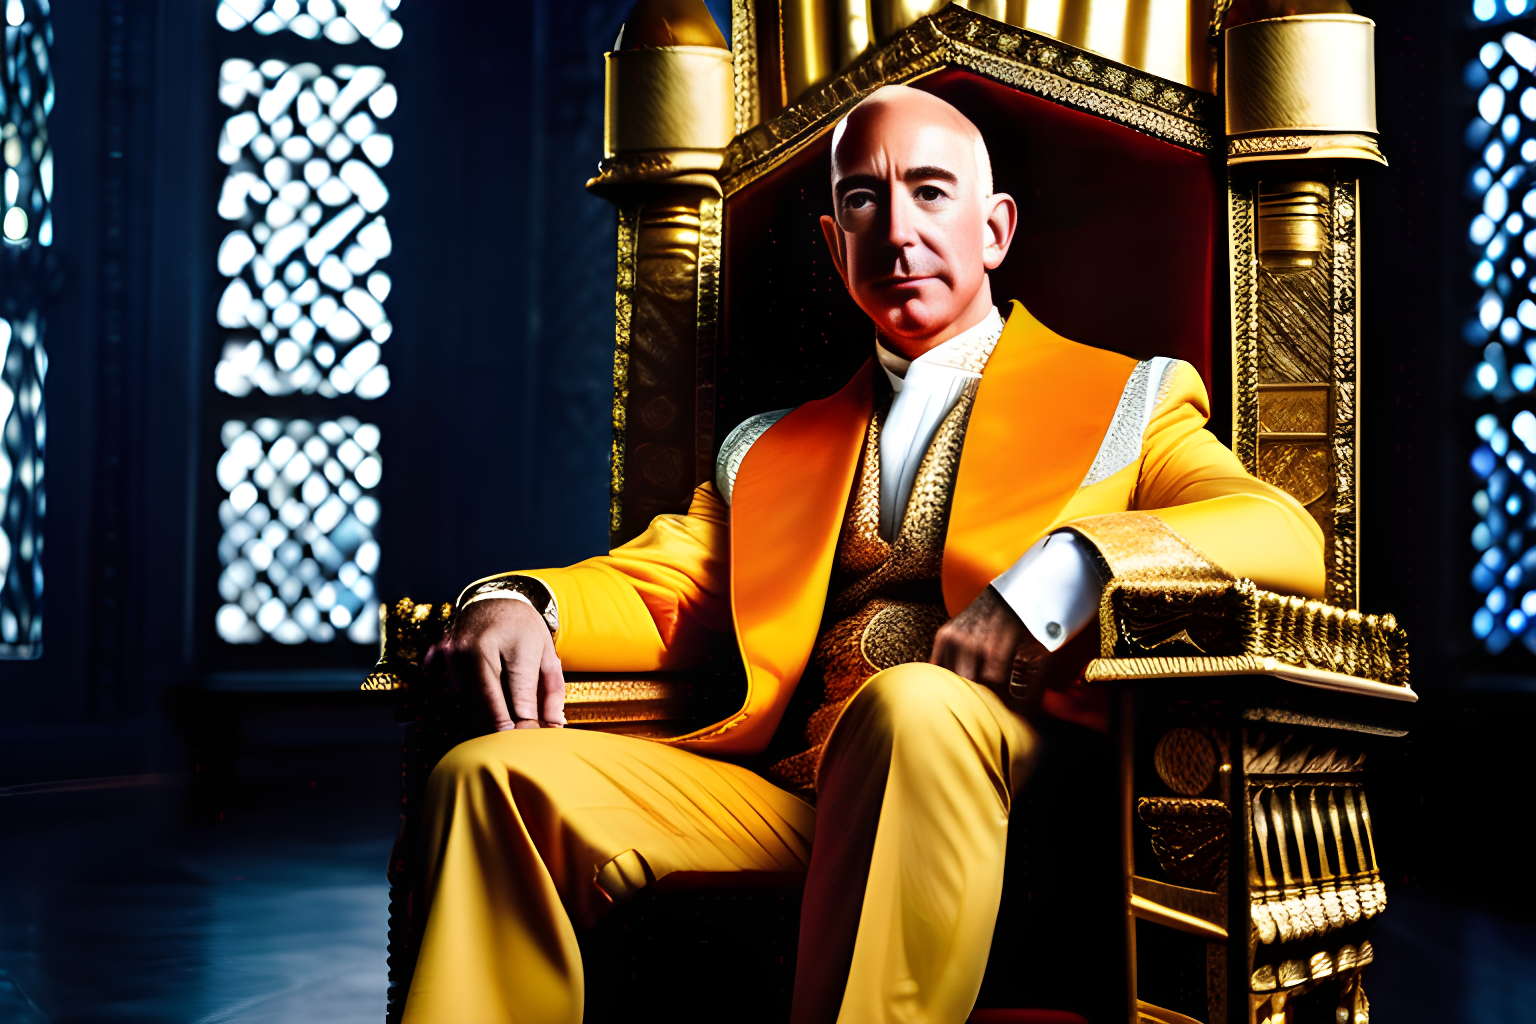 Breathtaking photograph of Jeff Bezos wearing a crown and sitting on a throne.